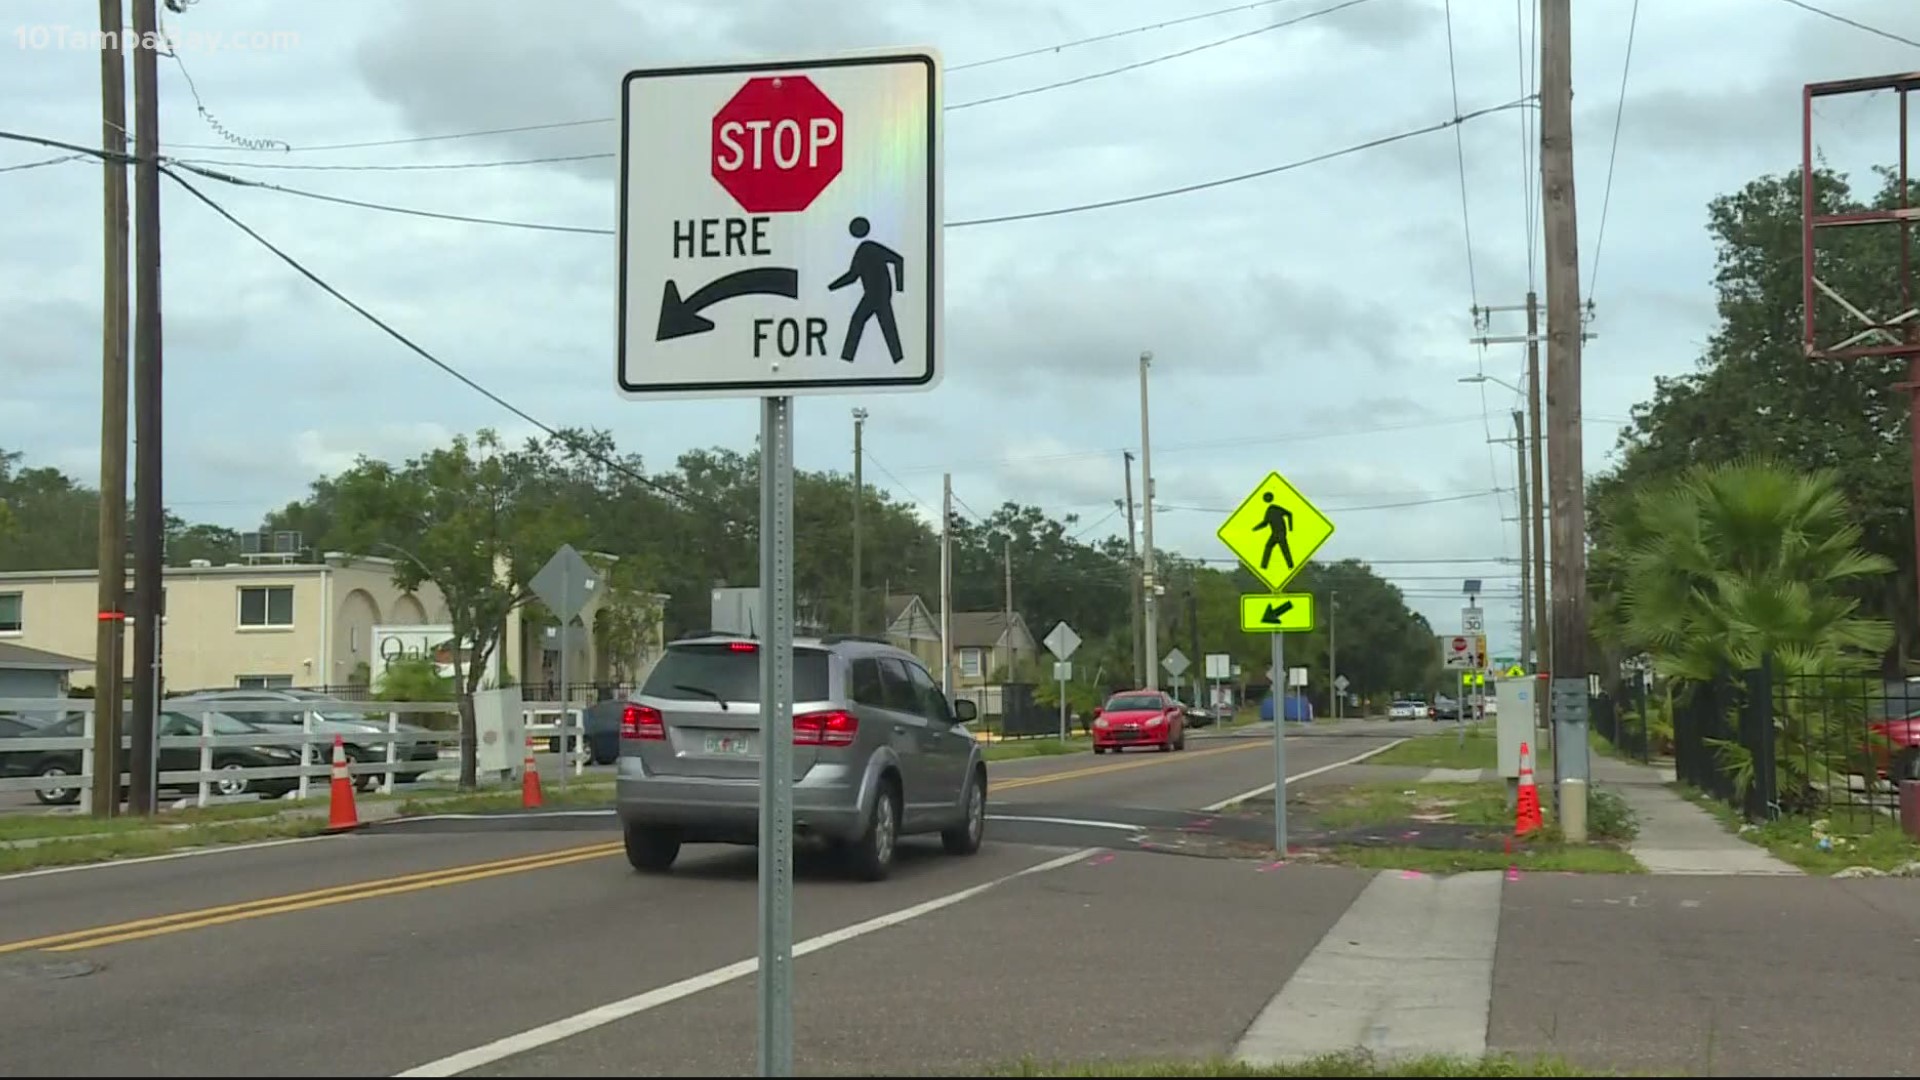 In an area known as a popular cut through for drivers in Tampa near the University of South Florida, too many people are dying.